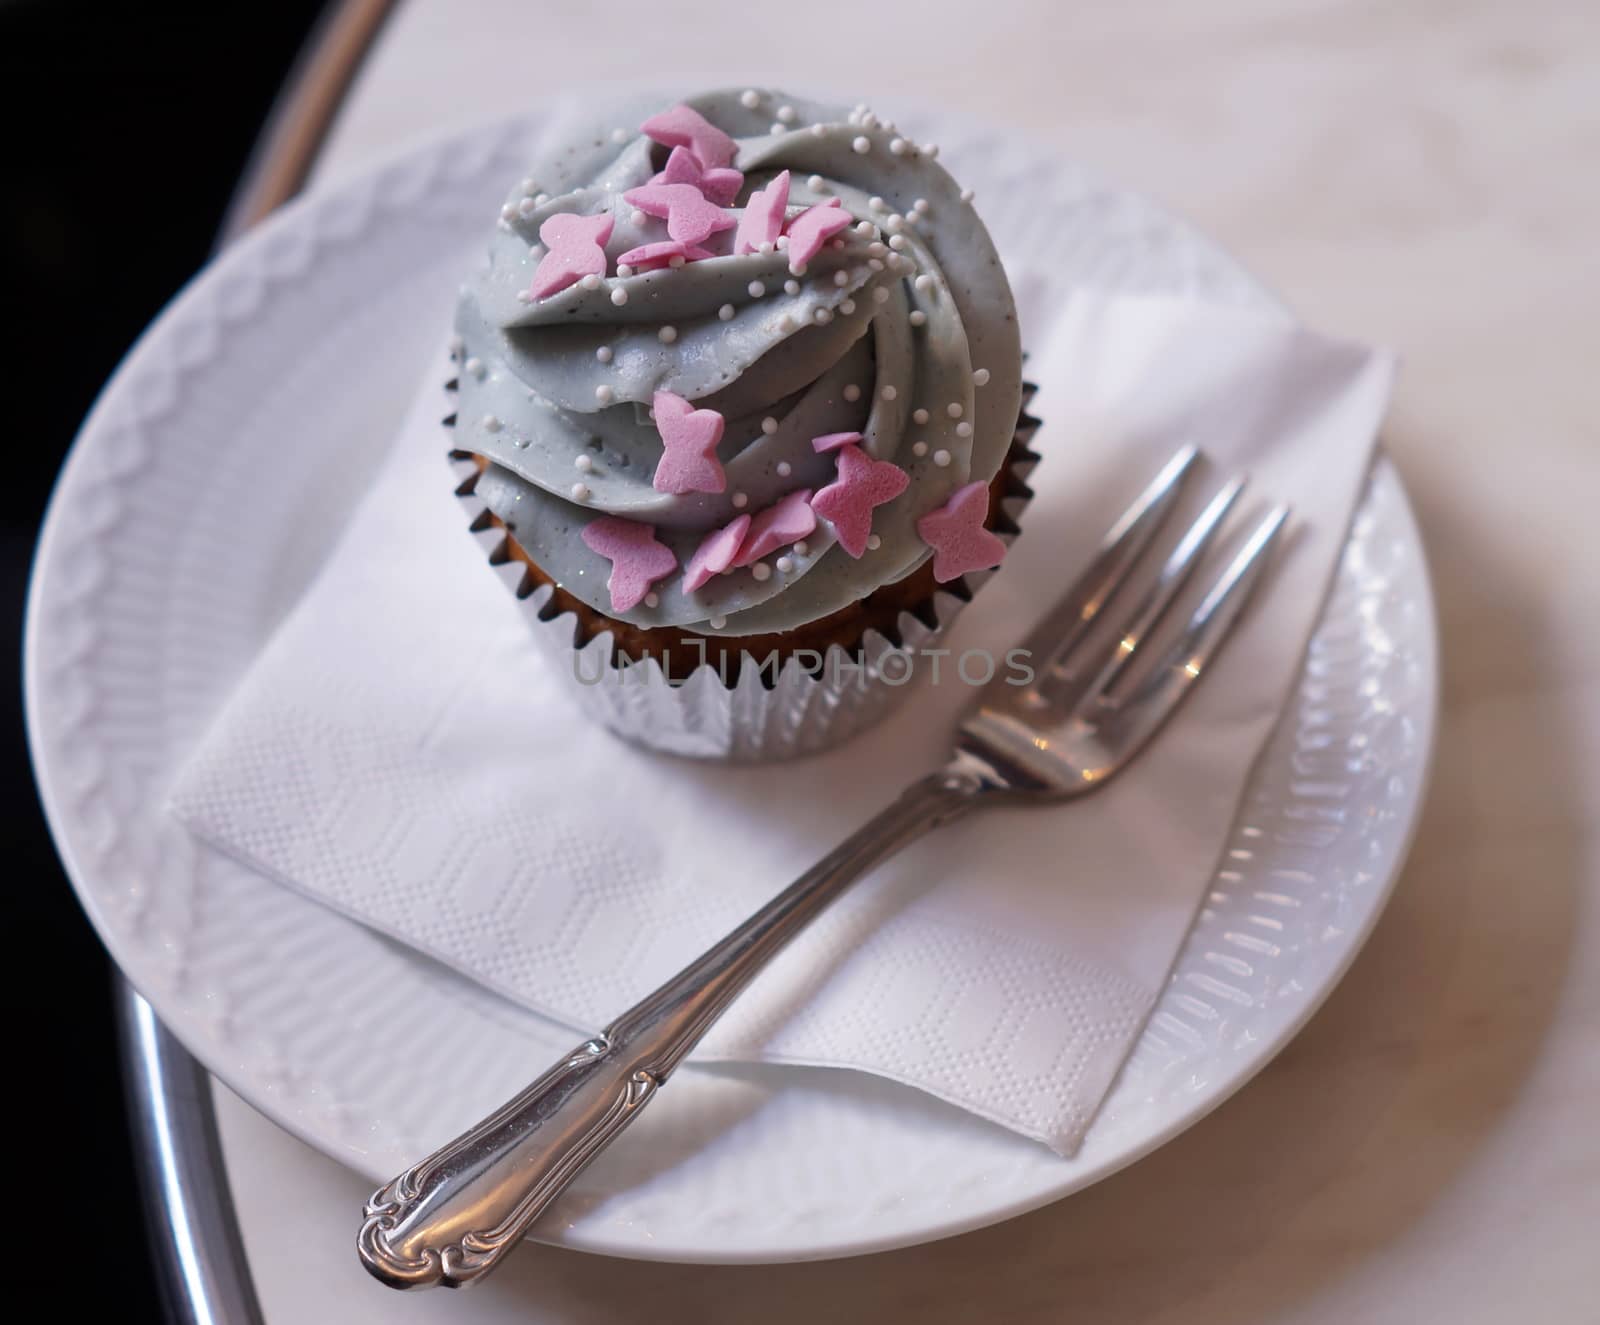 Cup cake on plate with fork napkin